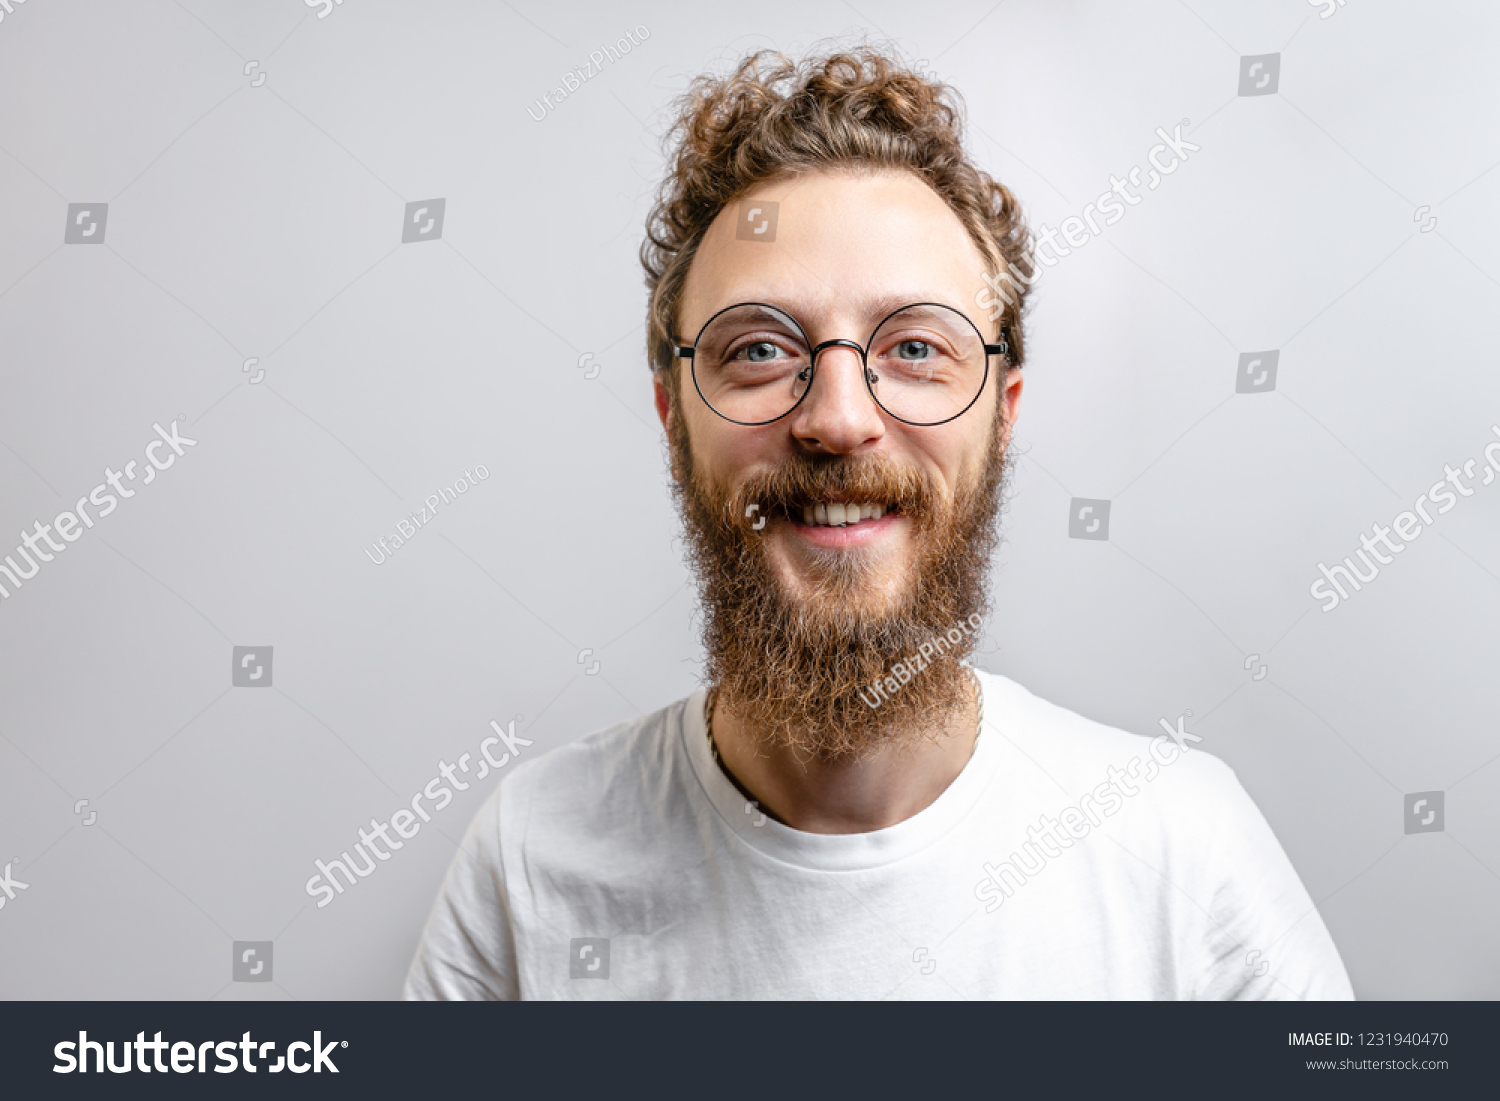 Portrait of young handsome hipster man with beard smiling laughing looking at camera over white background. #1231940470